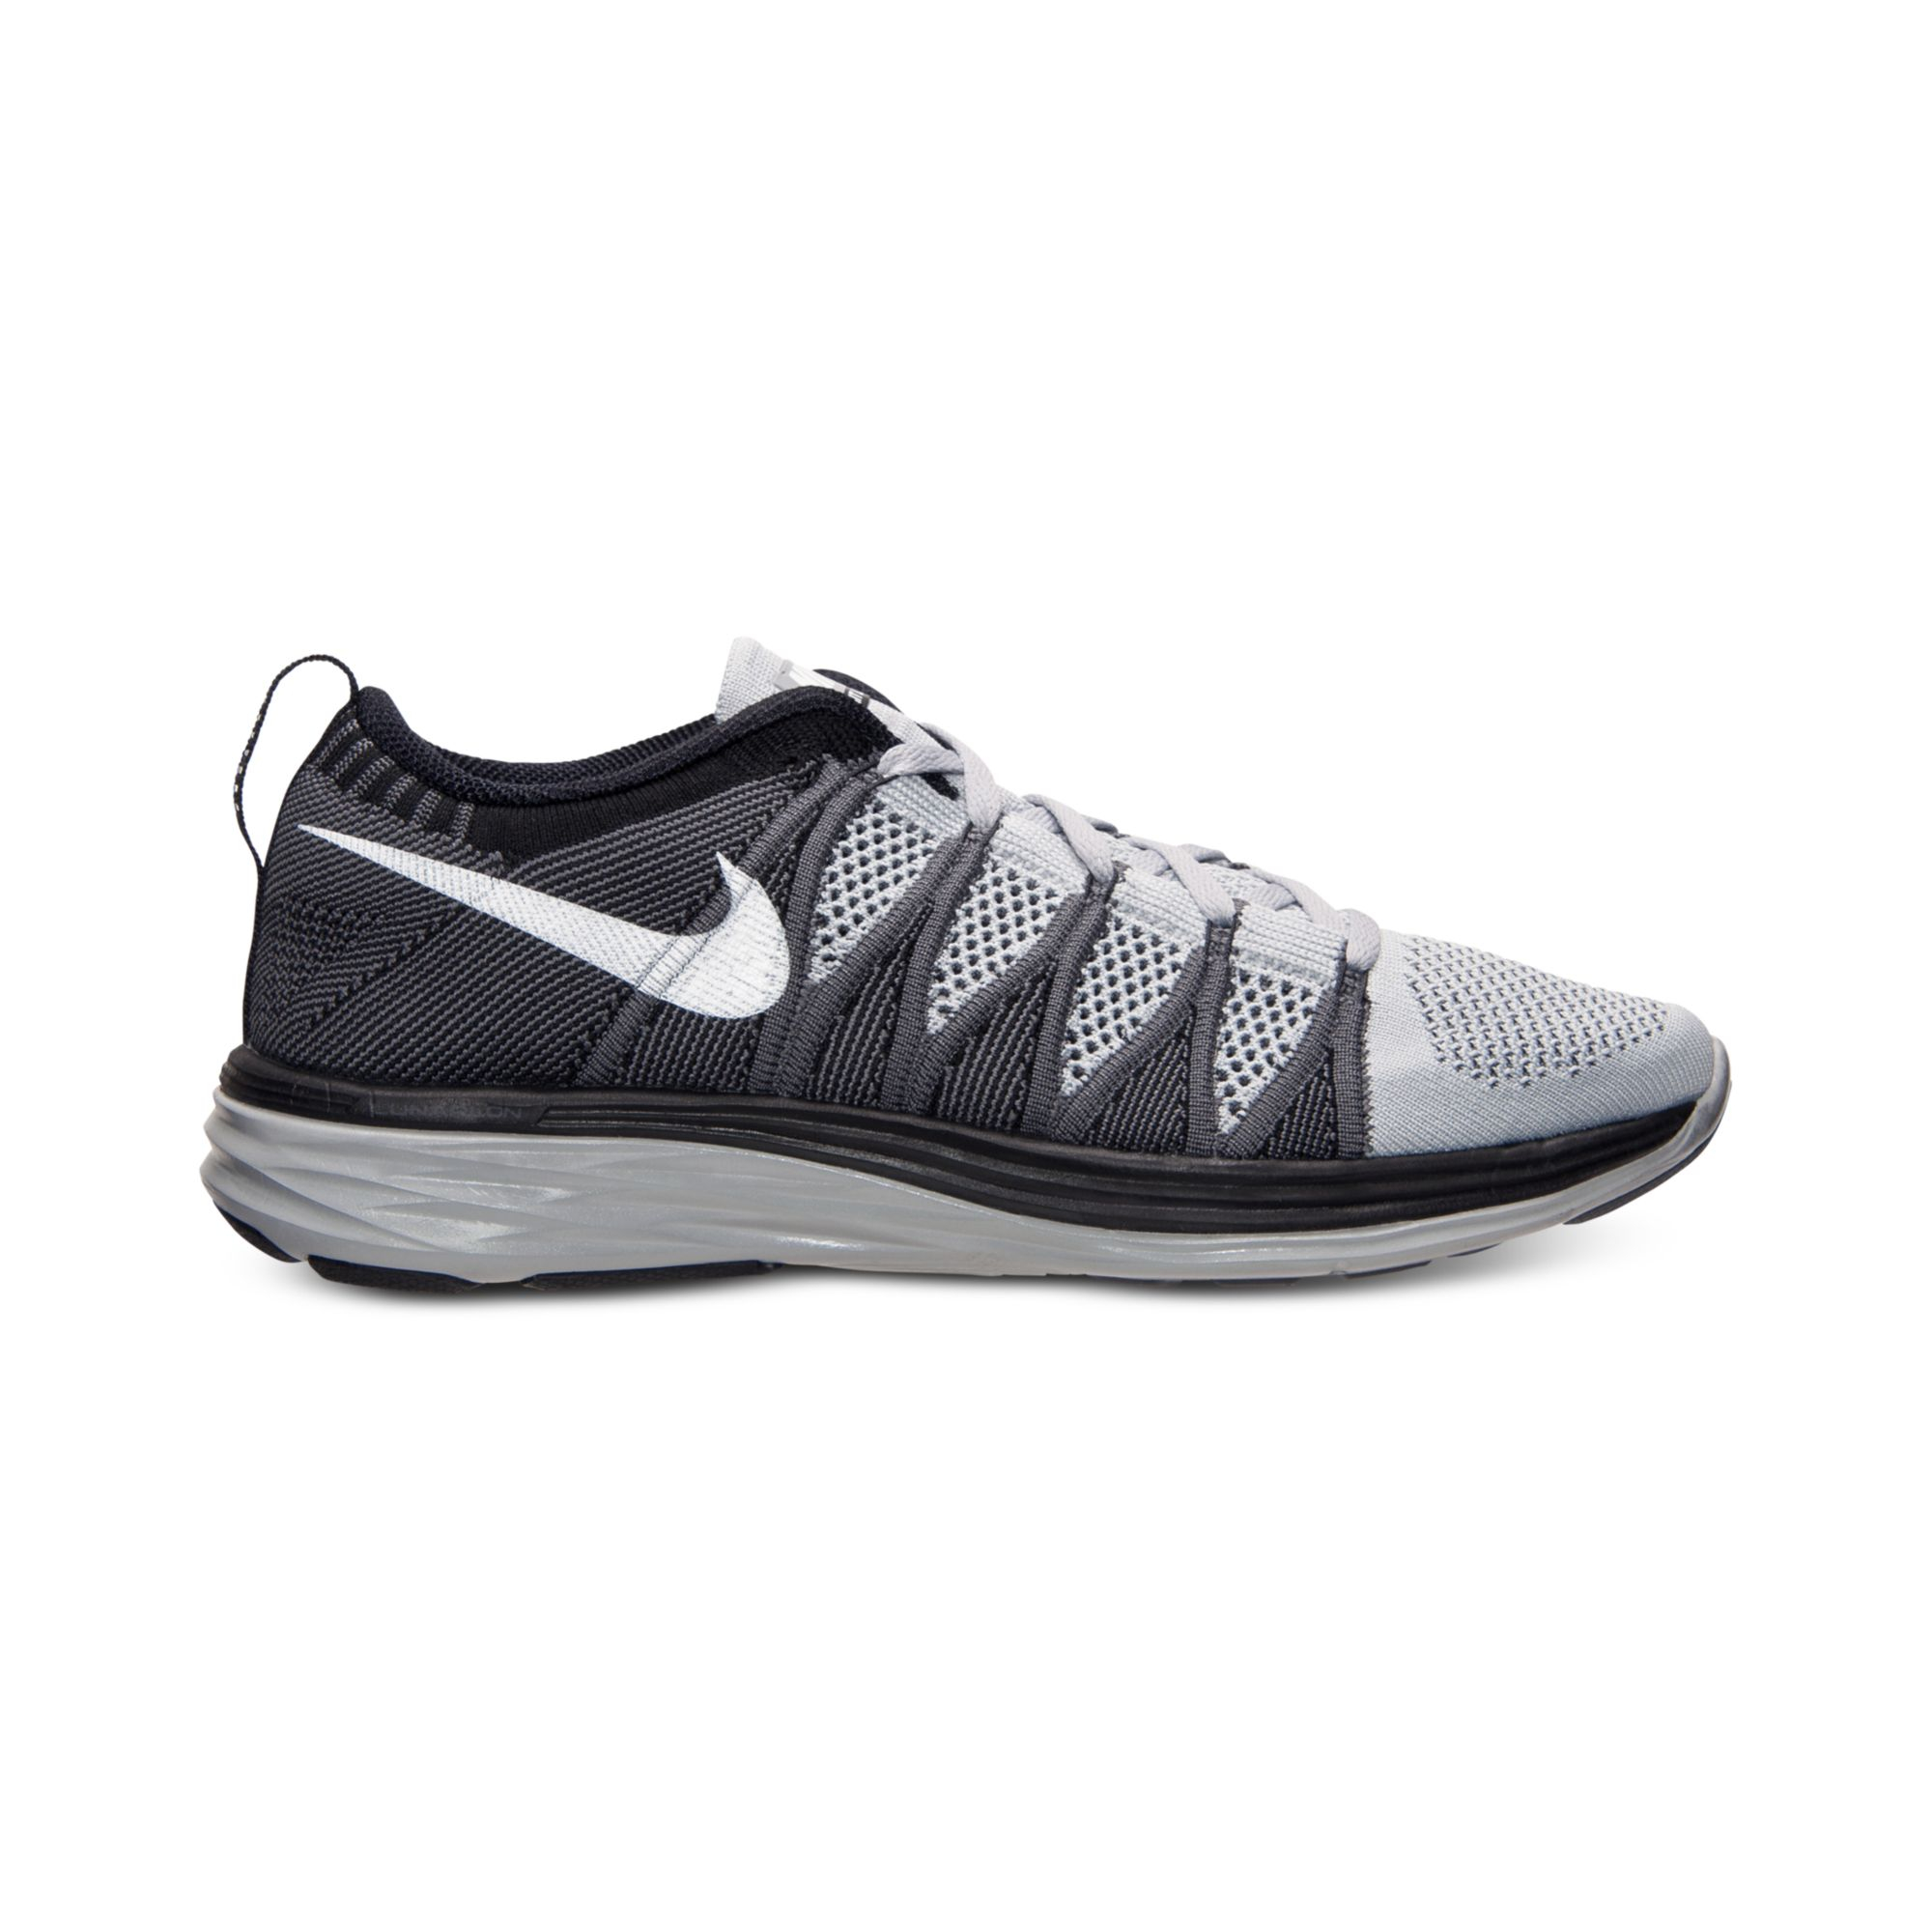 Lyst - Nike Mens Flyknit Lunar2 Running Sneakers From Finish Line in ...